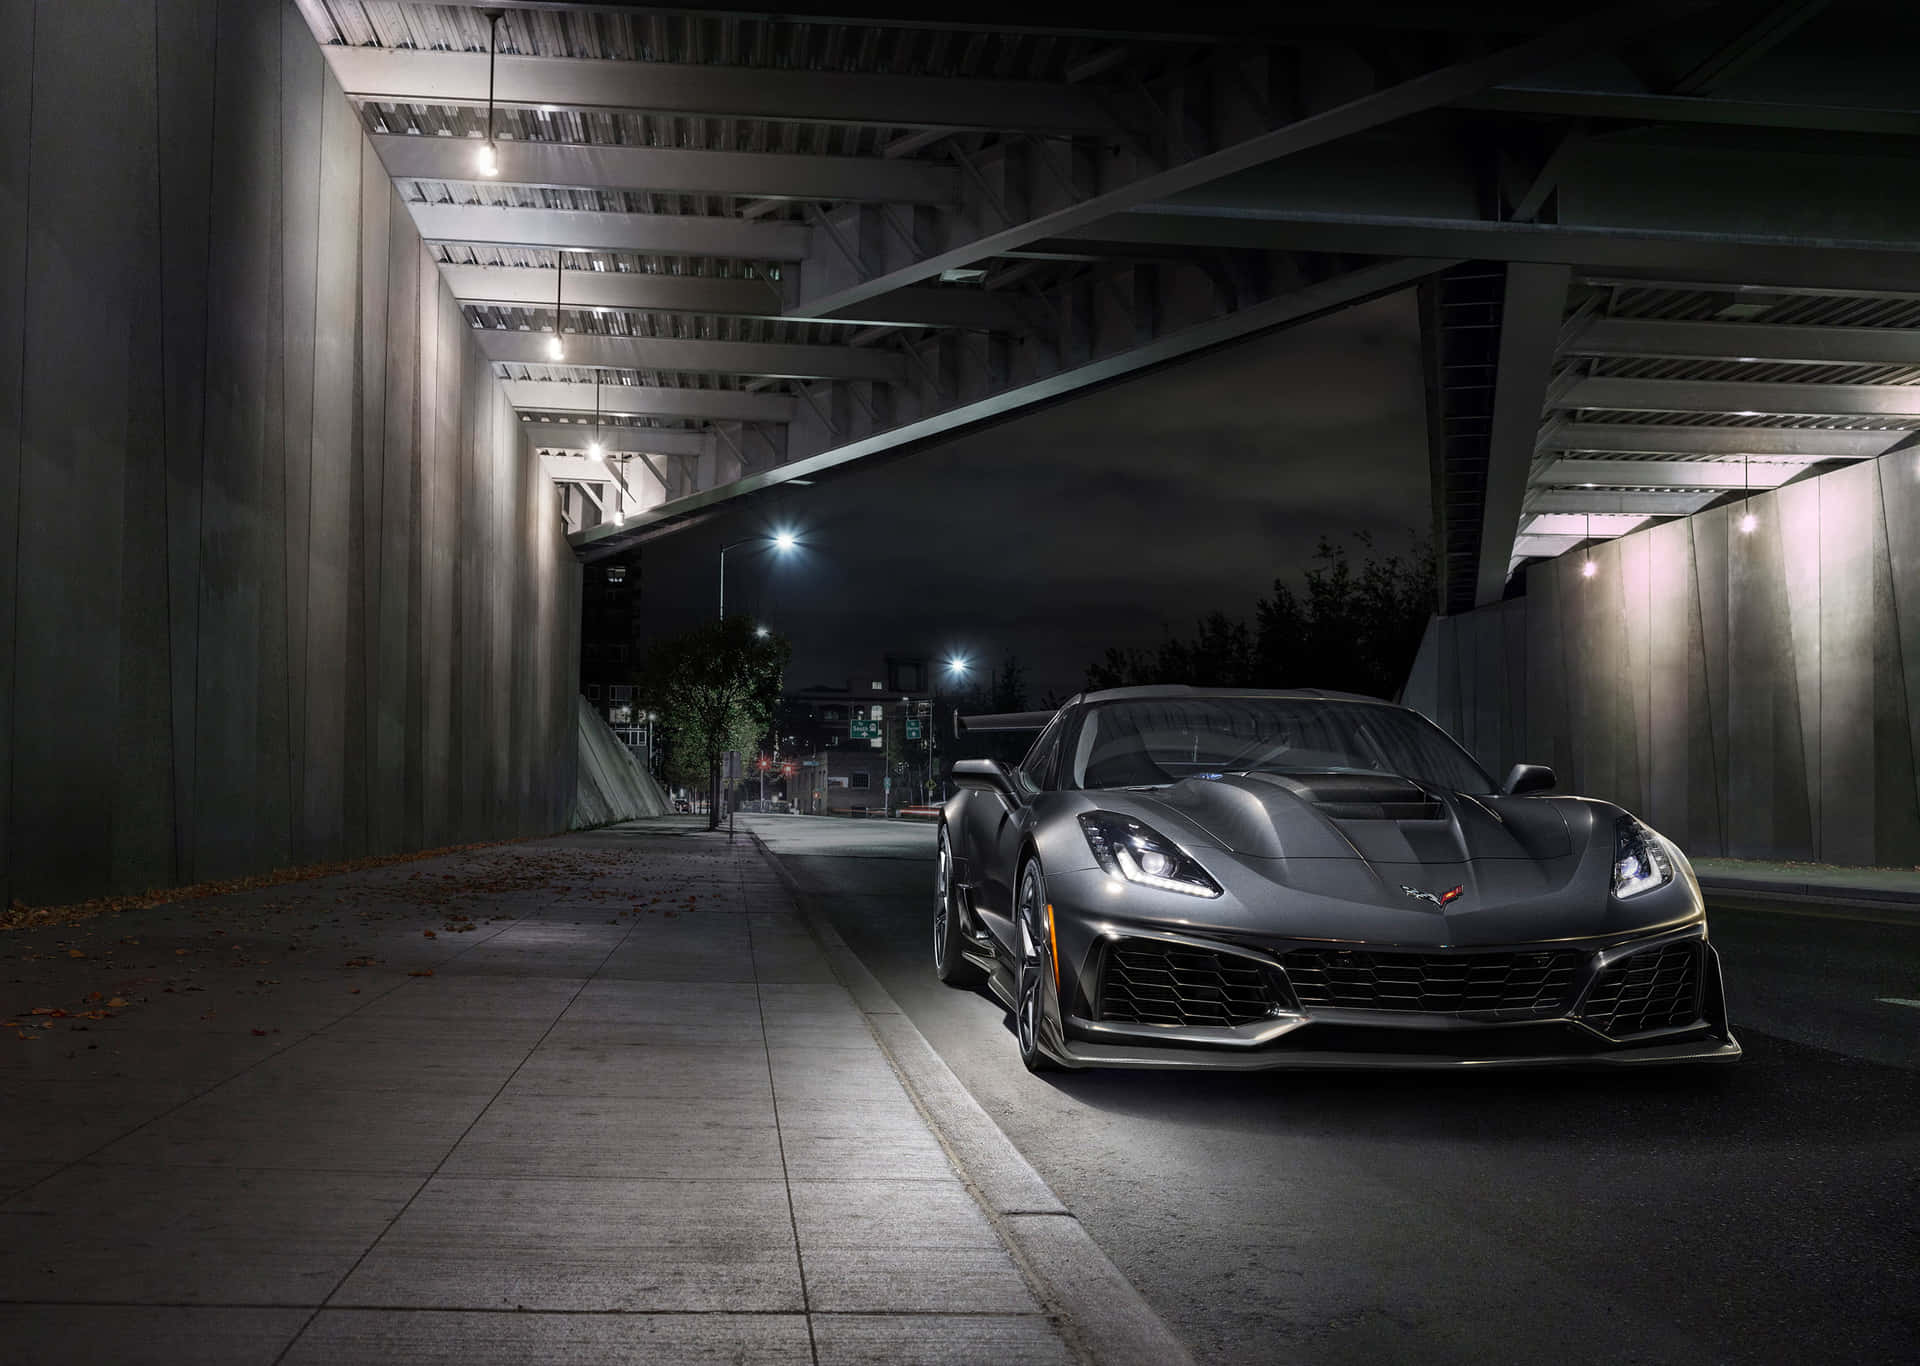 Magnificent Display Of Chevrolet Corvette Zr1's Speed And Power Wallpaper